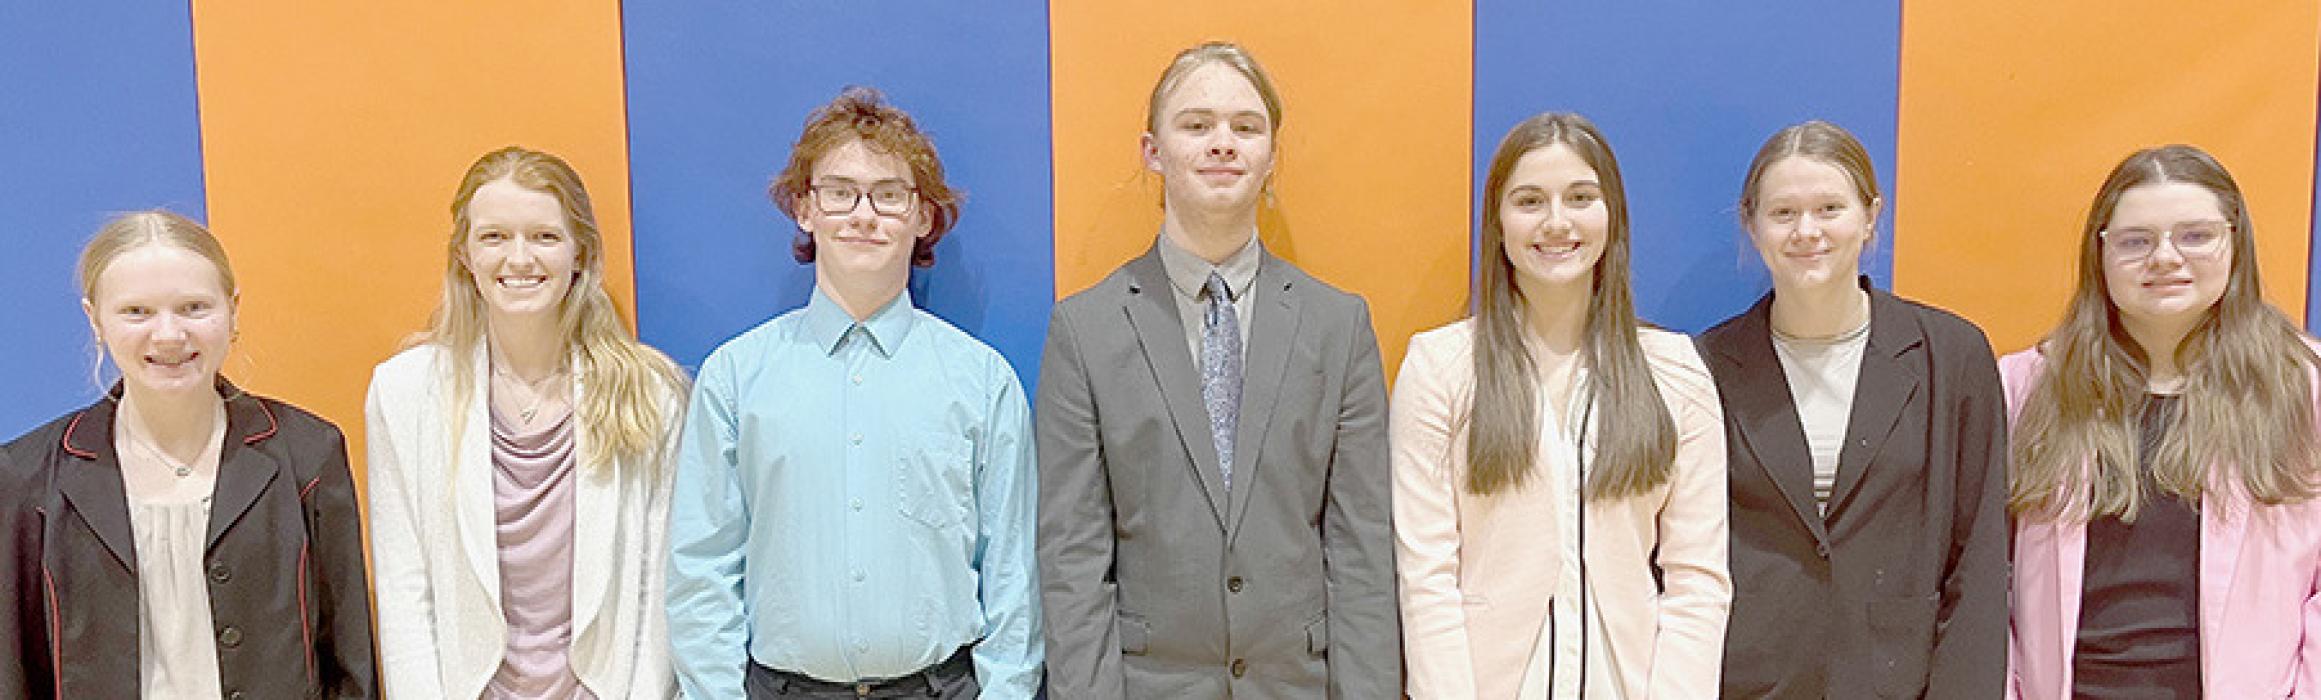 The Ainsworth Speech Team competed in the Gordon-Rushville Invitational. Team members competing were (Left to Right) Kiley Orton, Terra Shoemaker, William Biltoft, Erick Hitchcock, Willa Flynn, Puridy Haley and Hannah Beel.